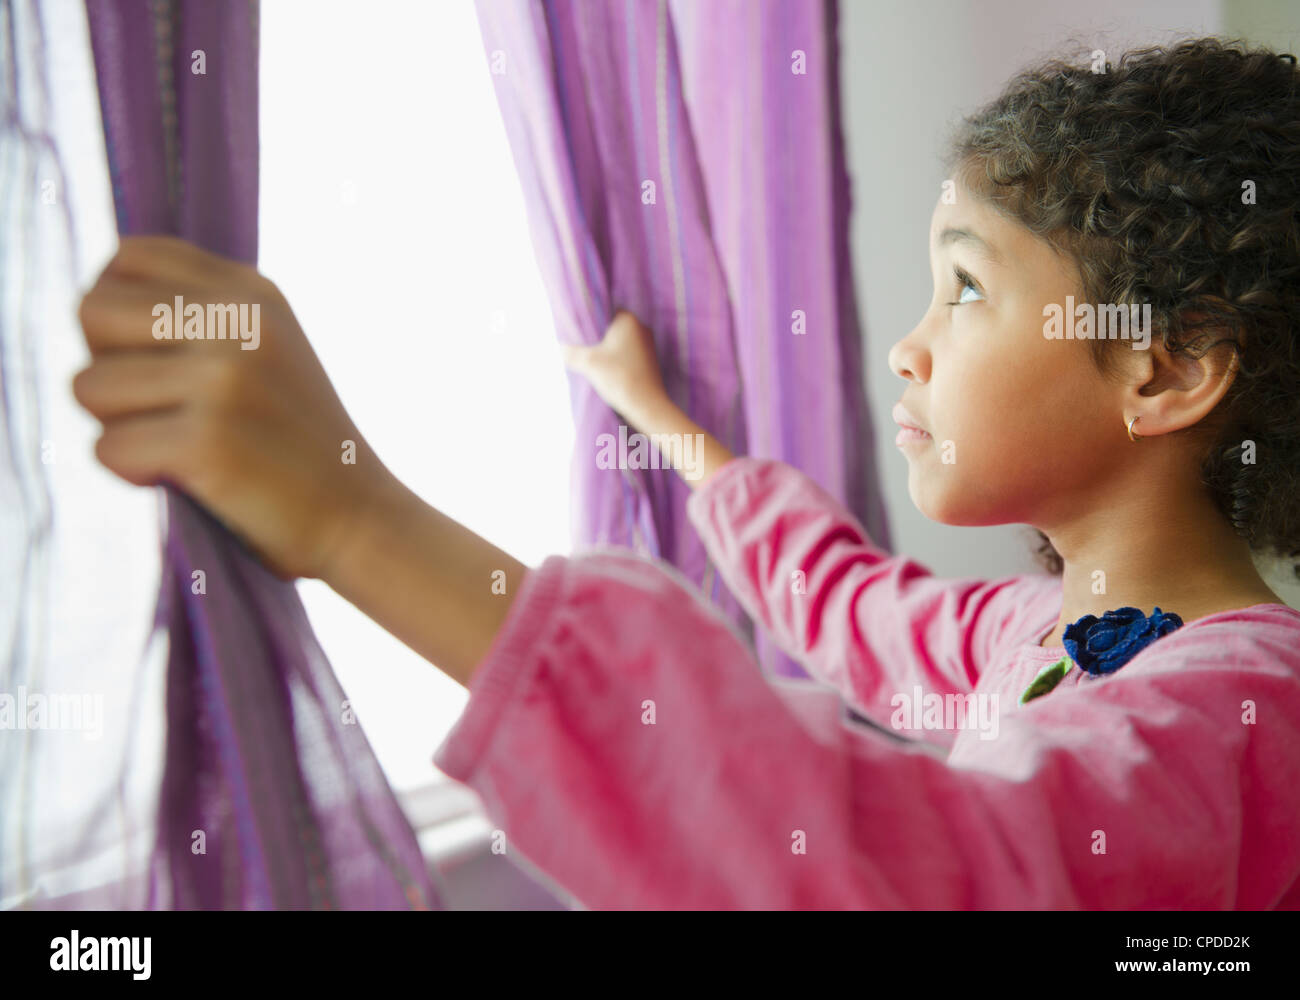 Mixed race girl opening curtains Stock Photo